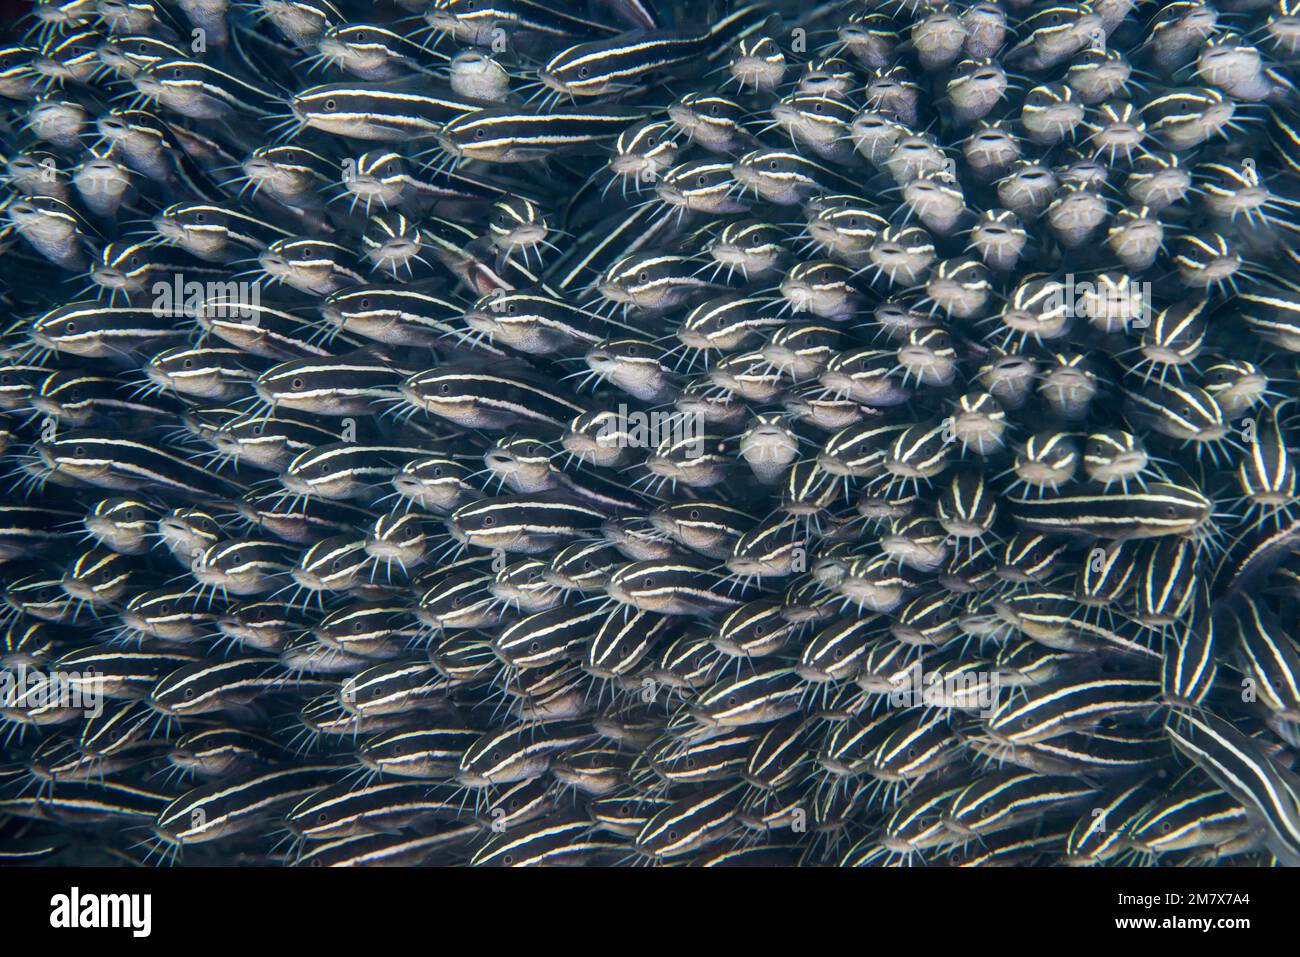 A wall of catfish. Mozambique: THESE INCREDIBLE images show off a school of catfish forming a wall along the seafloor, like a cloud of fish. One image Stock Photo